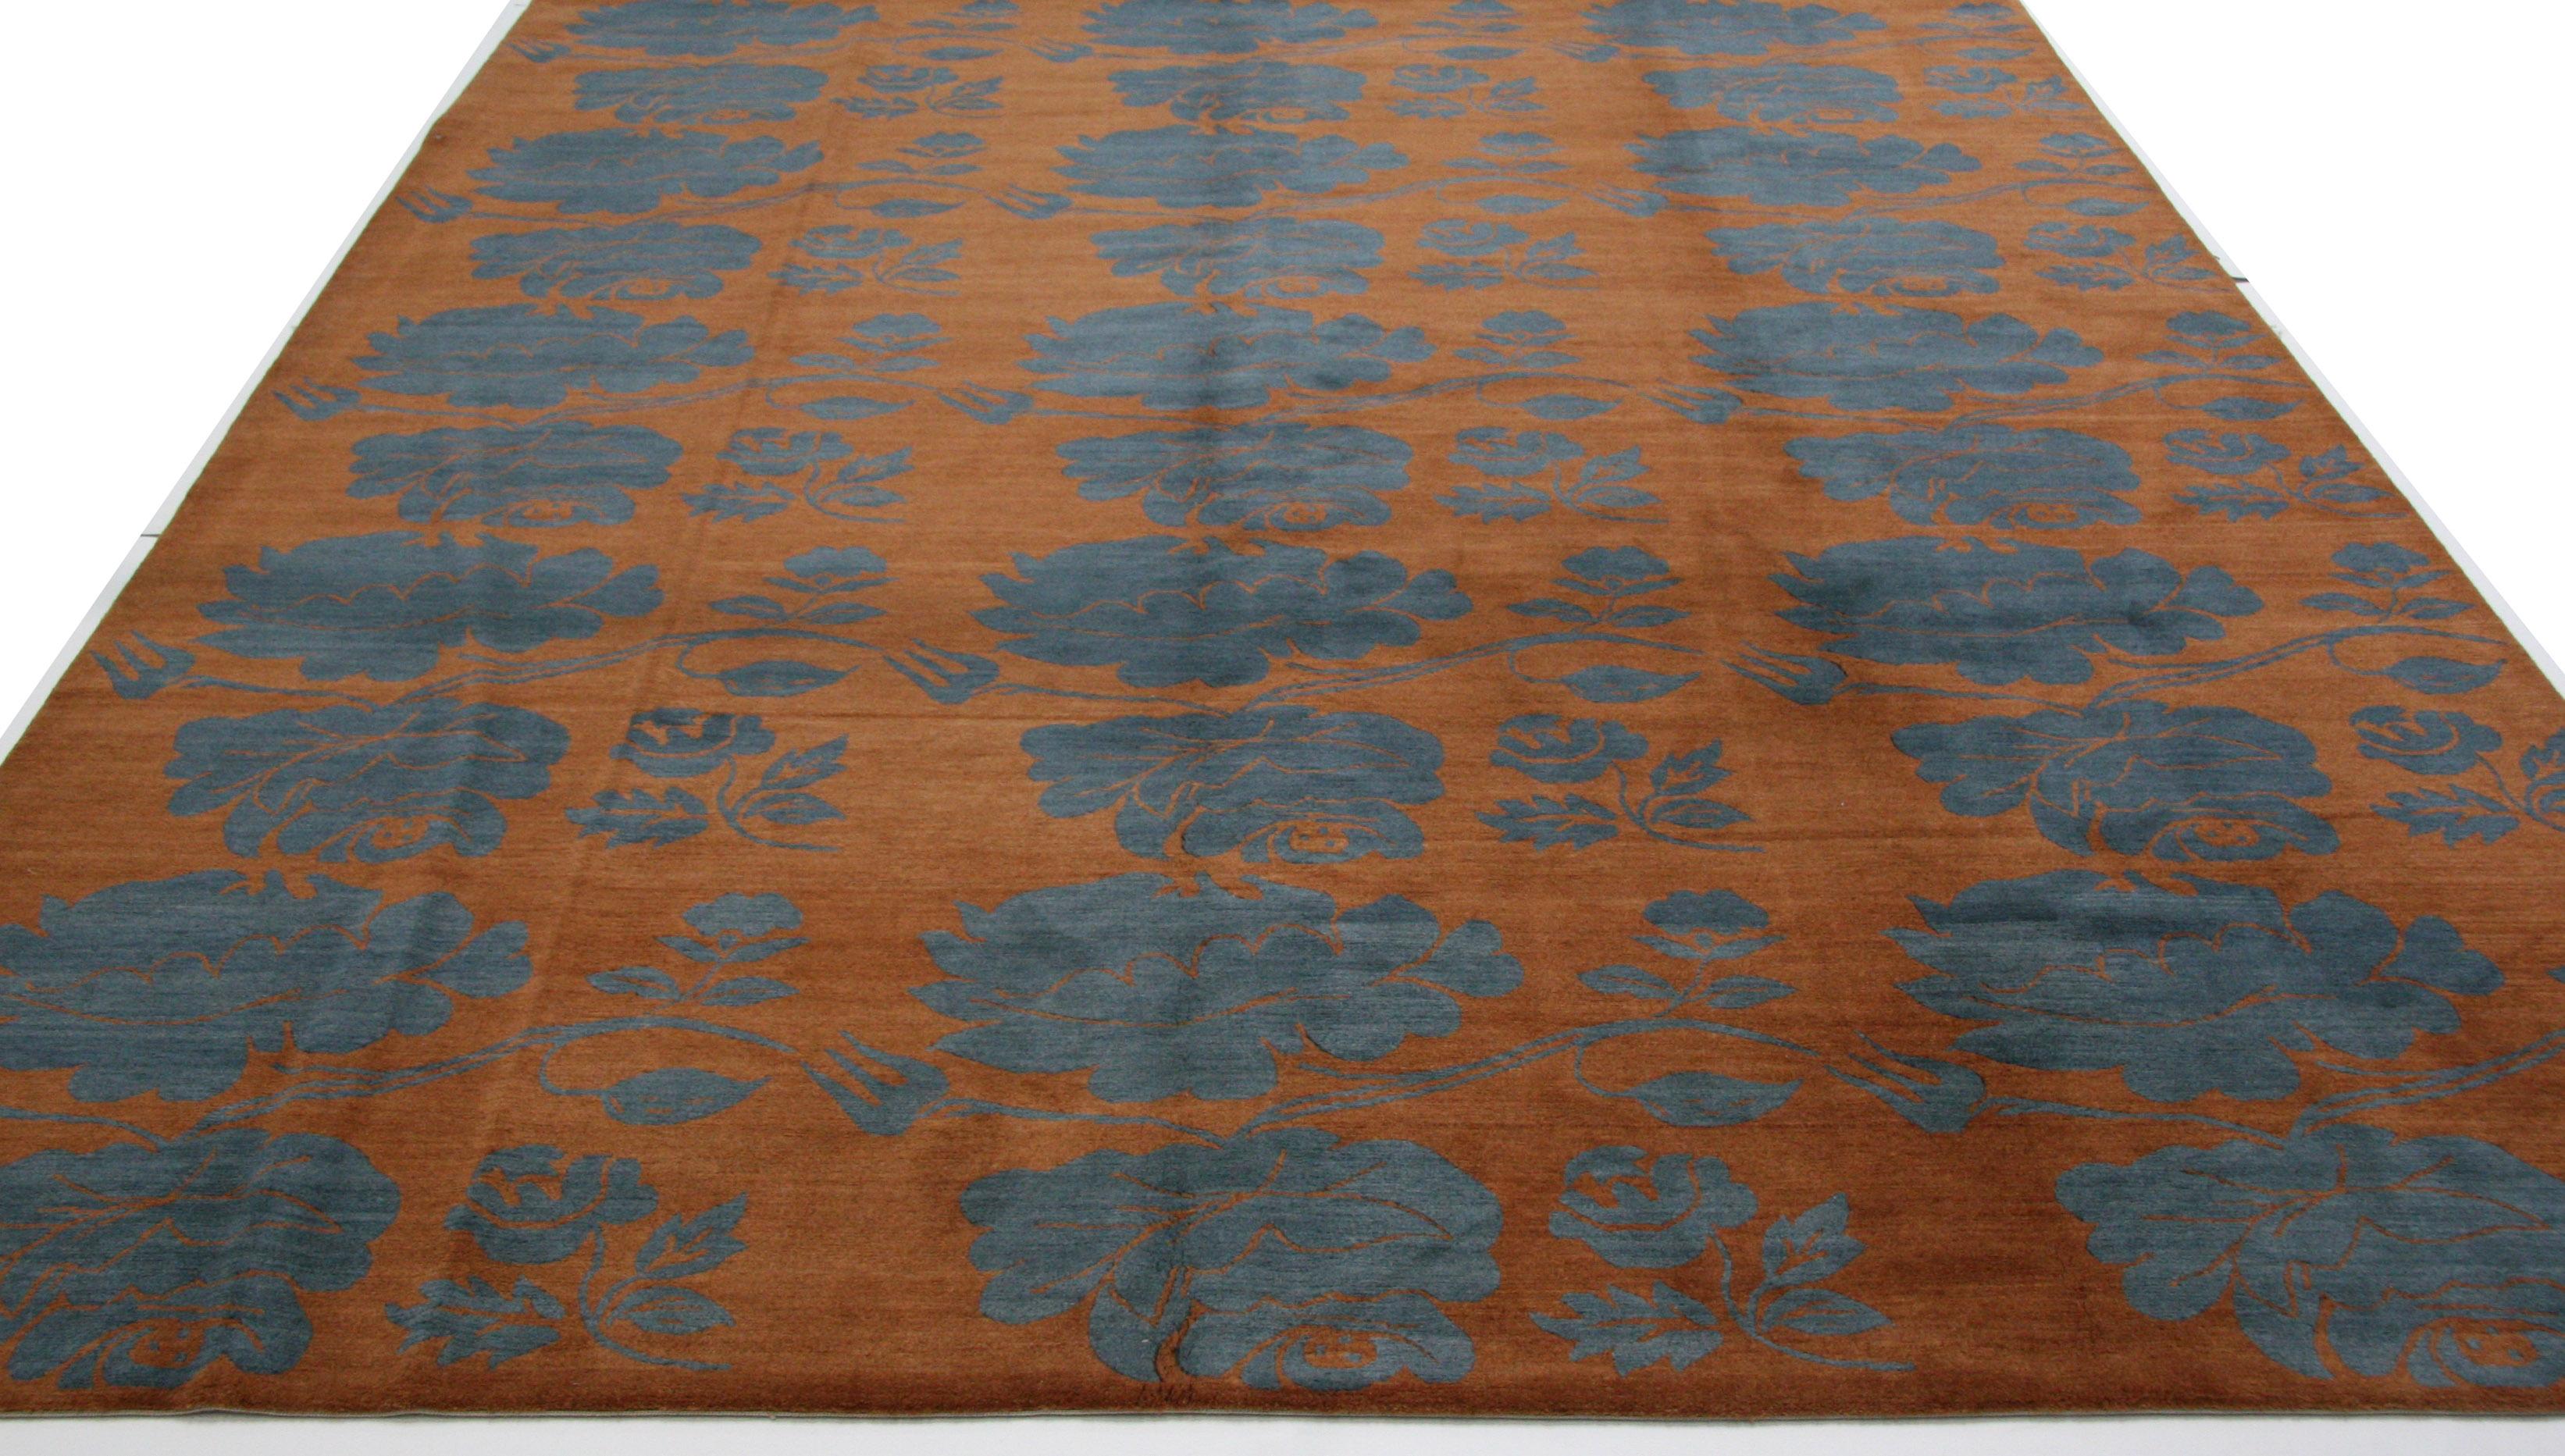 The large swirling blue gray floral pattern gives the impression of an applied design but a closer look reveals a deftly integrated blend of warm and cool colored fibers. All wool construction adds durability to beauty. 

Hand knotted in Nepal